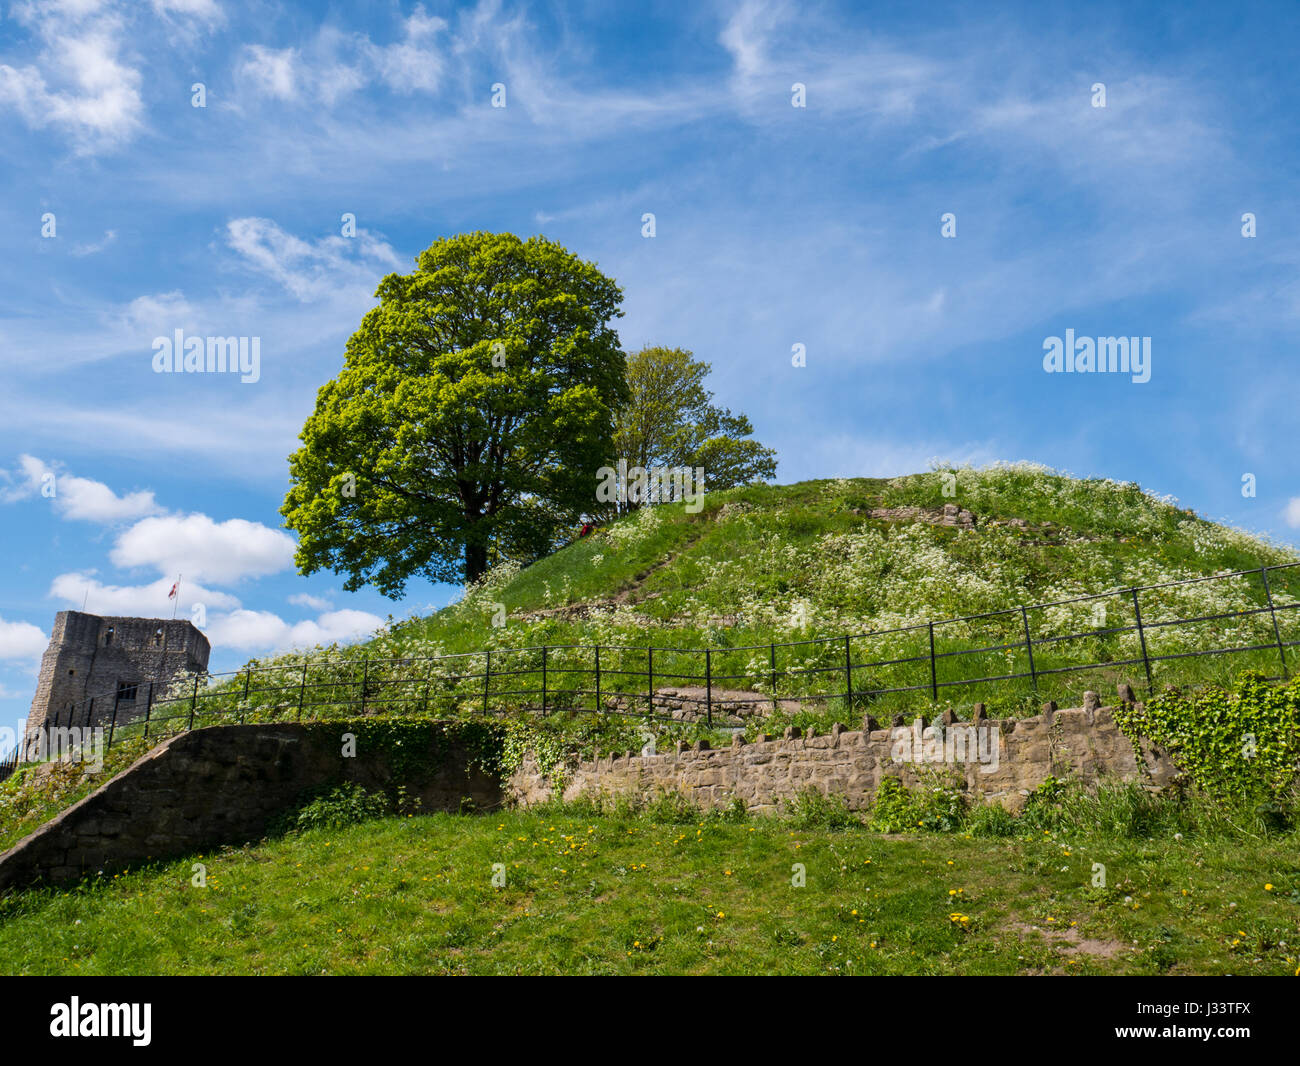 St George's Tower, Castle Mound, Oxford Castle, Oxford, Oxfordshire, England, UK, GB. Stock Photo